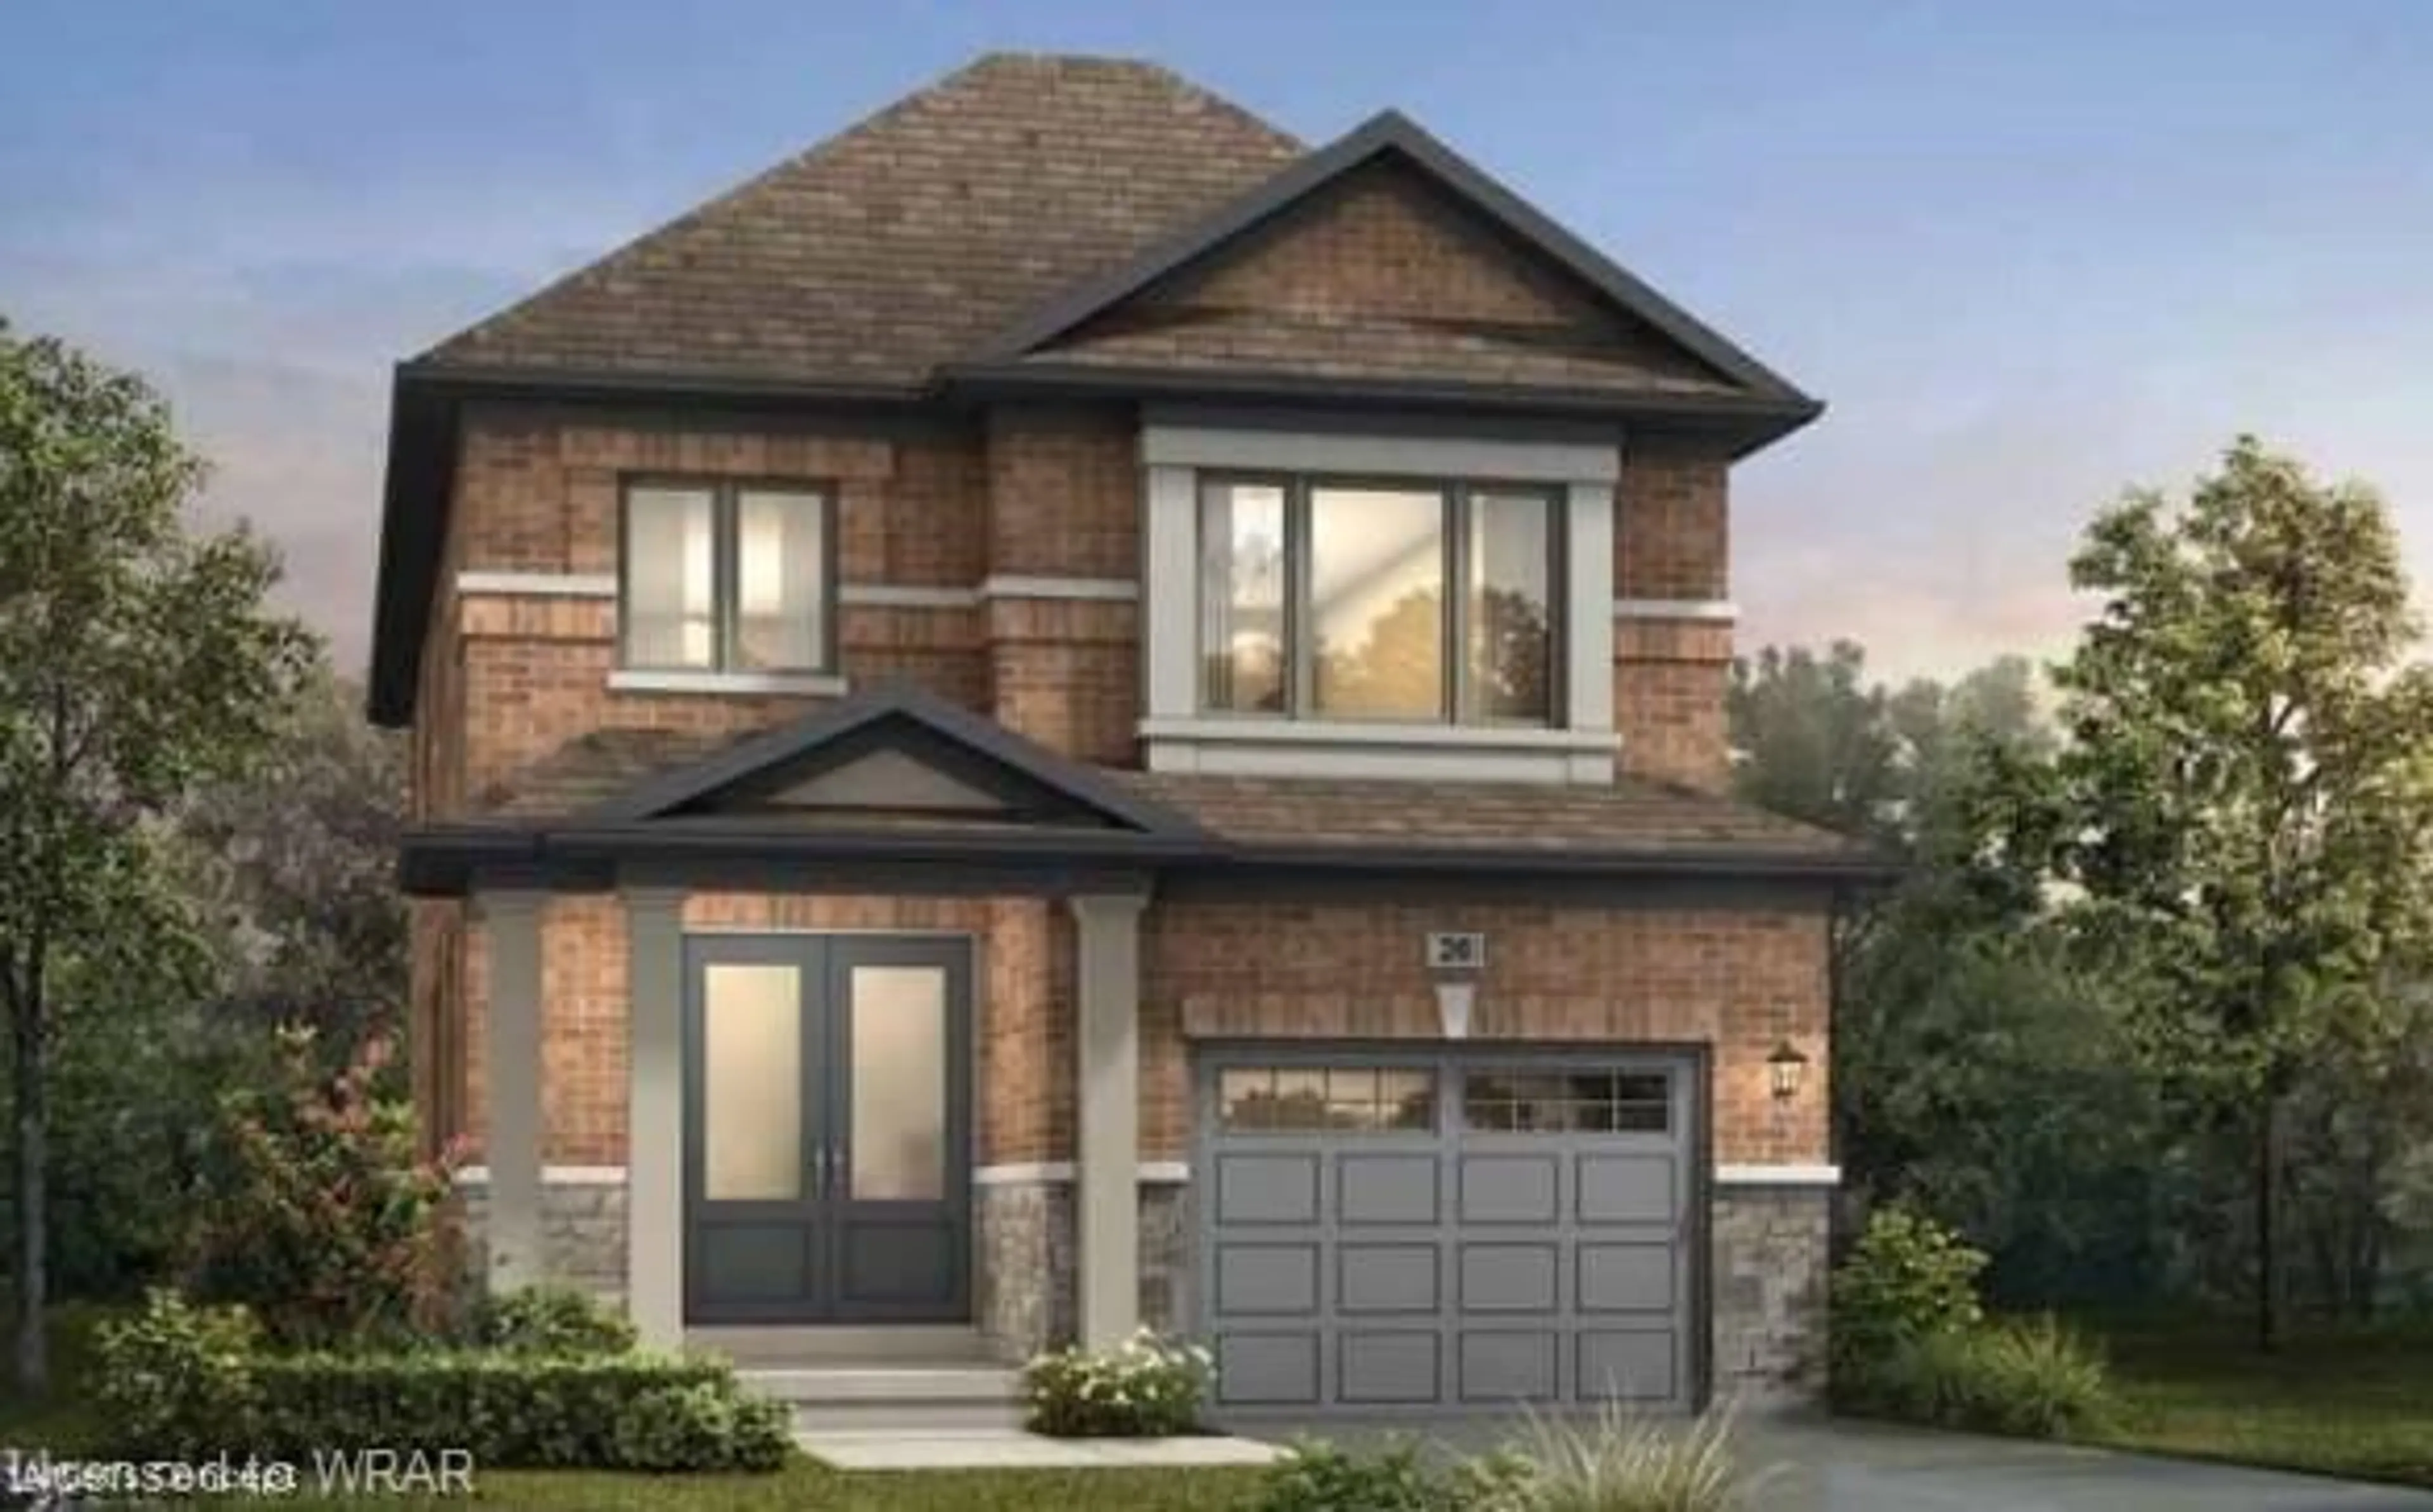 Home with brick exterior material for LOT 11 Langridge Way, Cambridge Ontario N1R 5S3